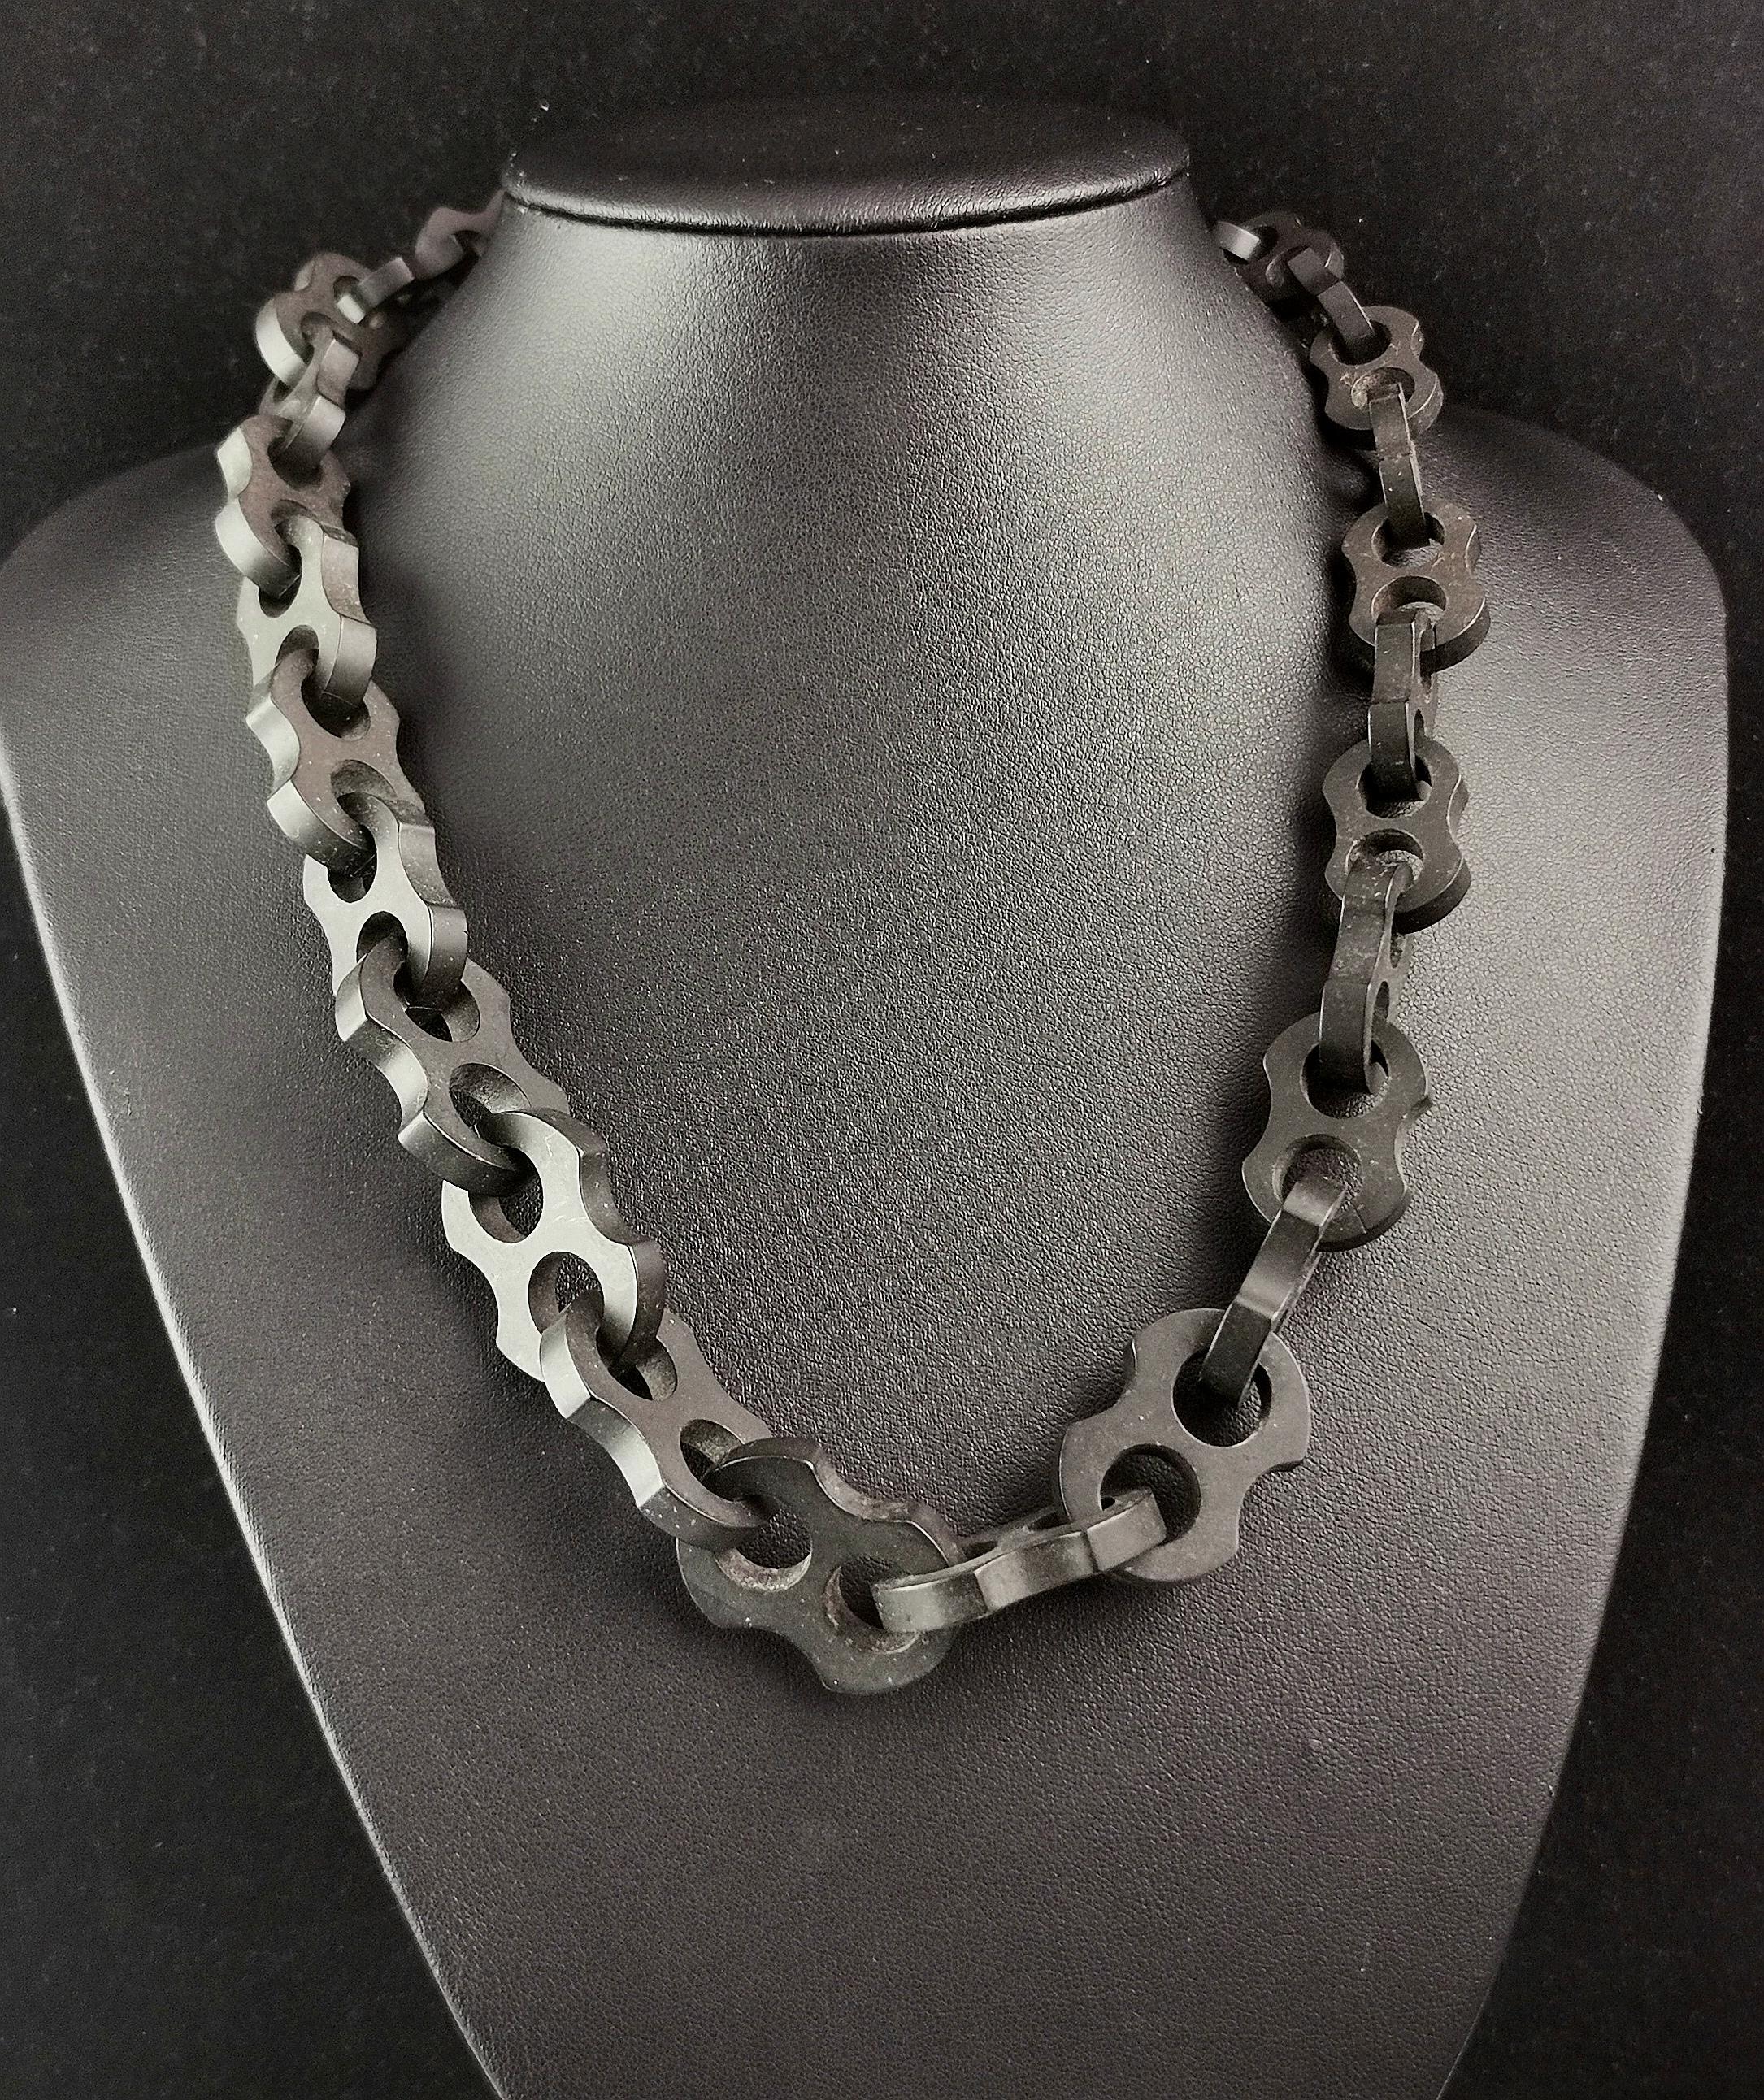 An attractive and unusual antique Victorian Vulcanite chain necklace.

The necklace features large, chunky, fancy mariner style Links, interlocking along the length and it fastens with a black lacquered hook fastener so could double up as a watch /